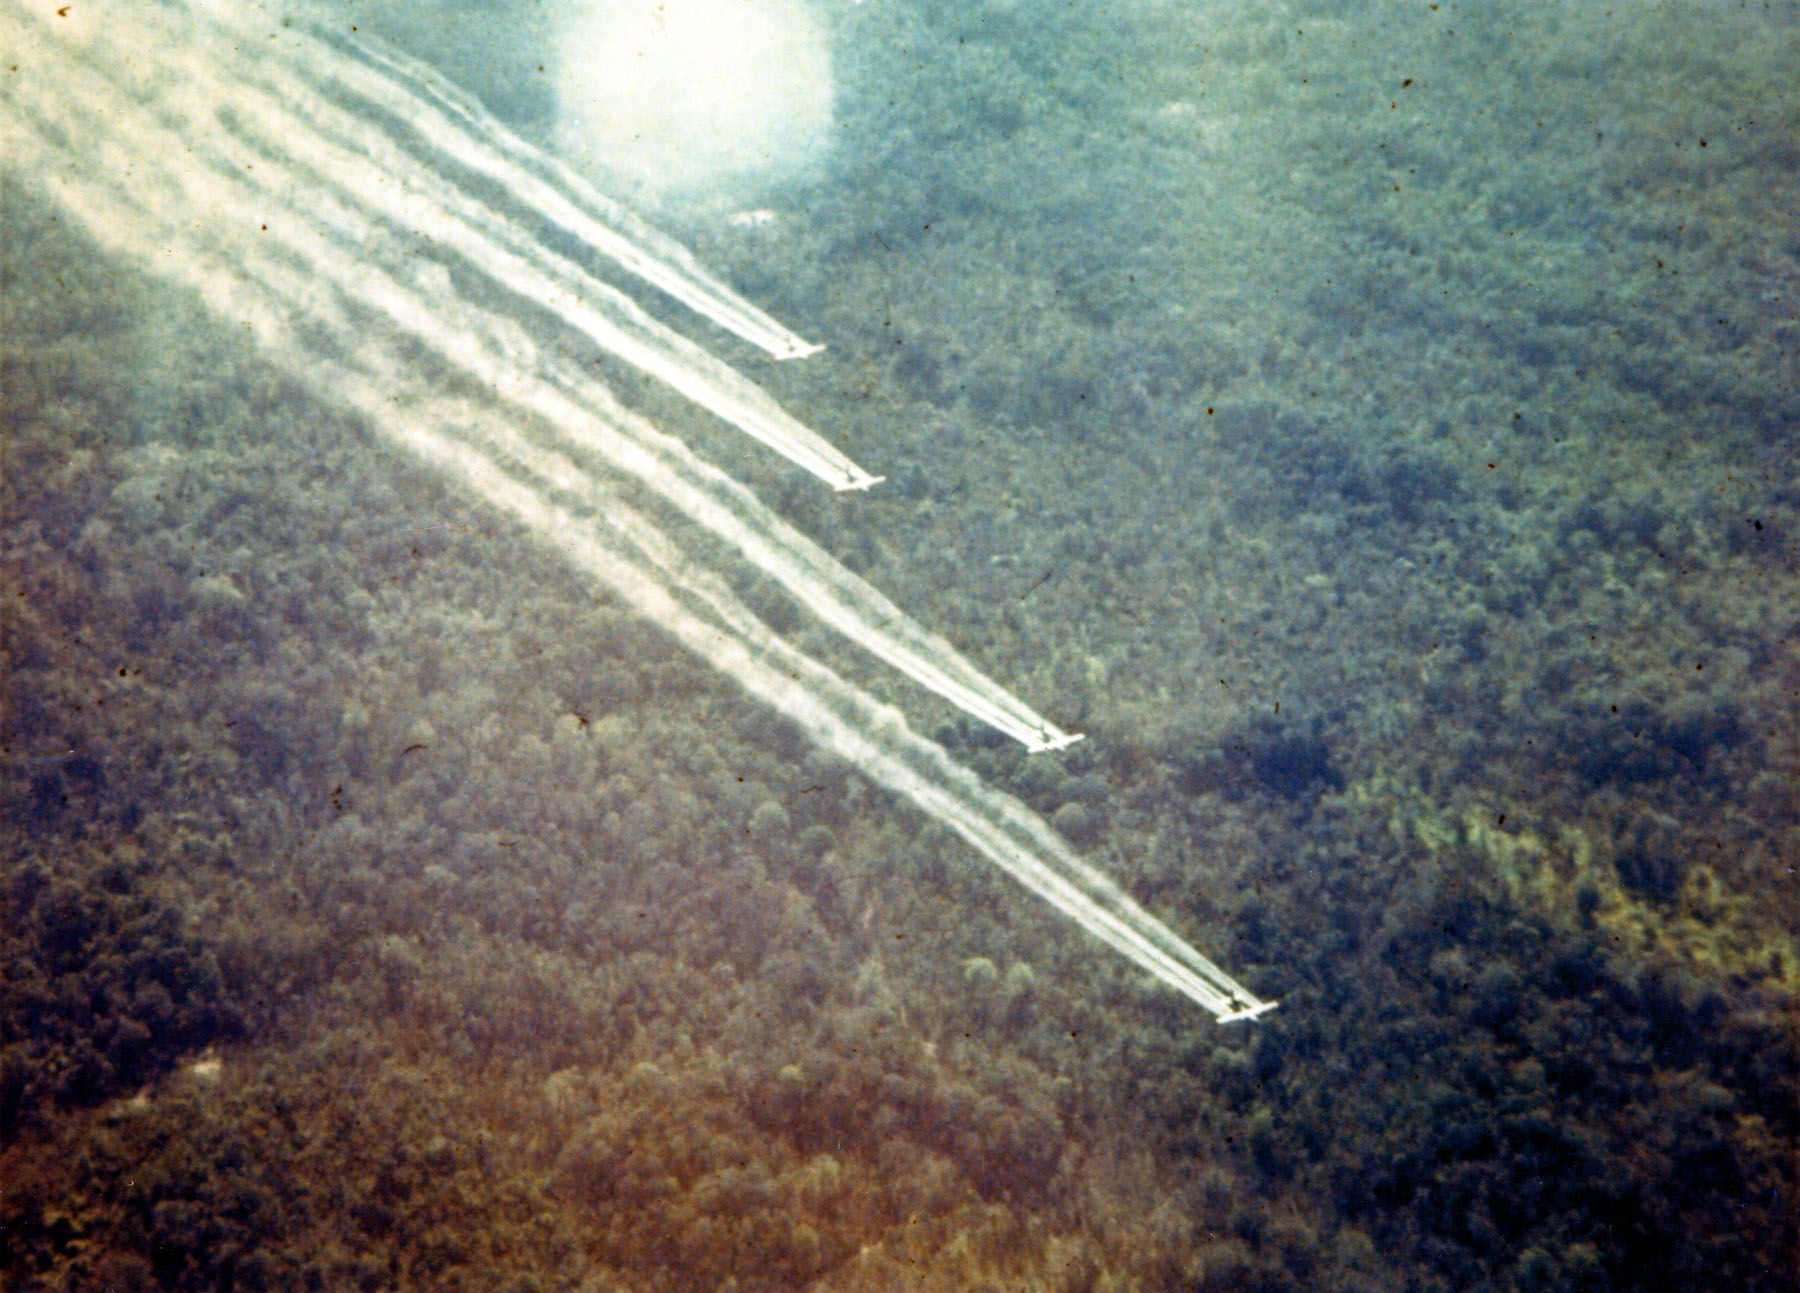 Photo of UC-123 airplanes spraying herbicides in central South Vietnam.